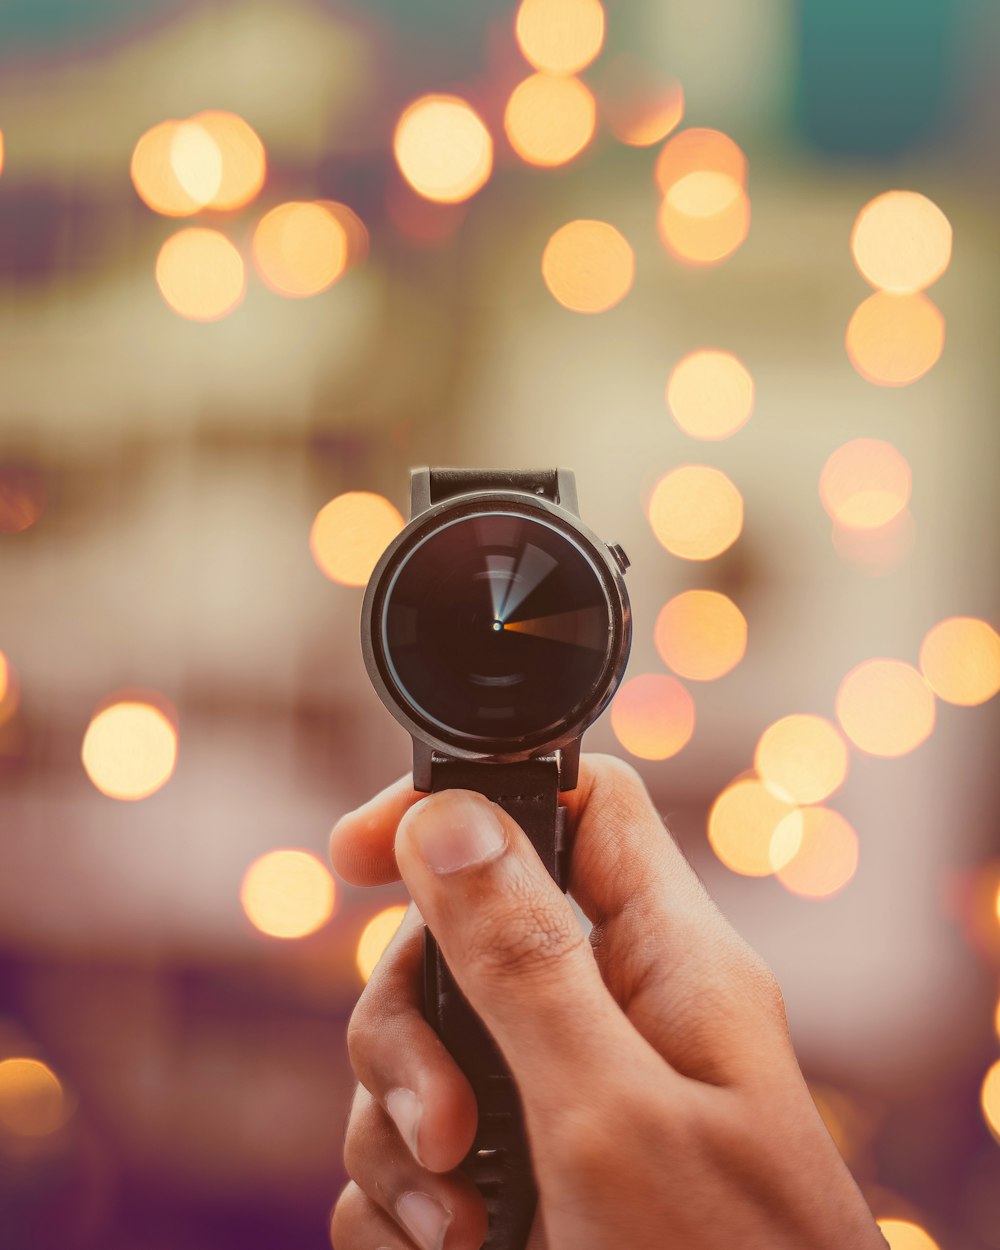 round silver-colored smartwatch bokeh photography